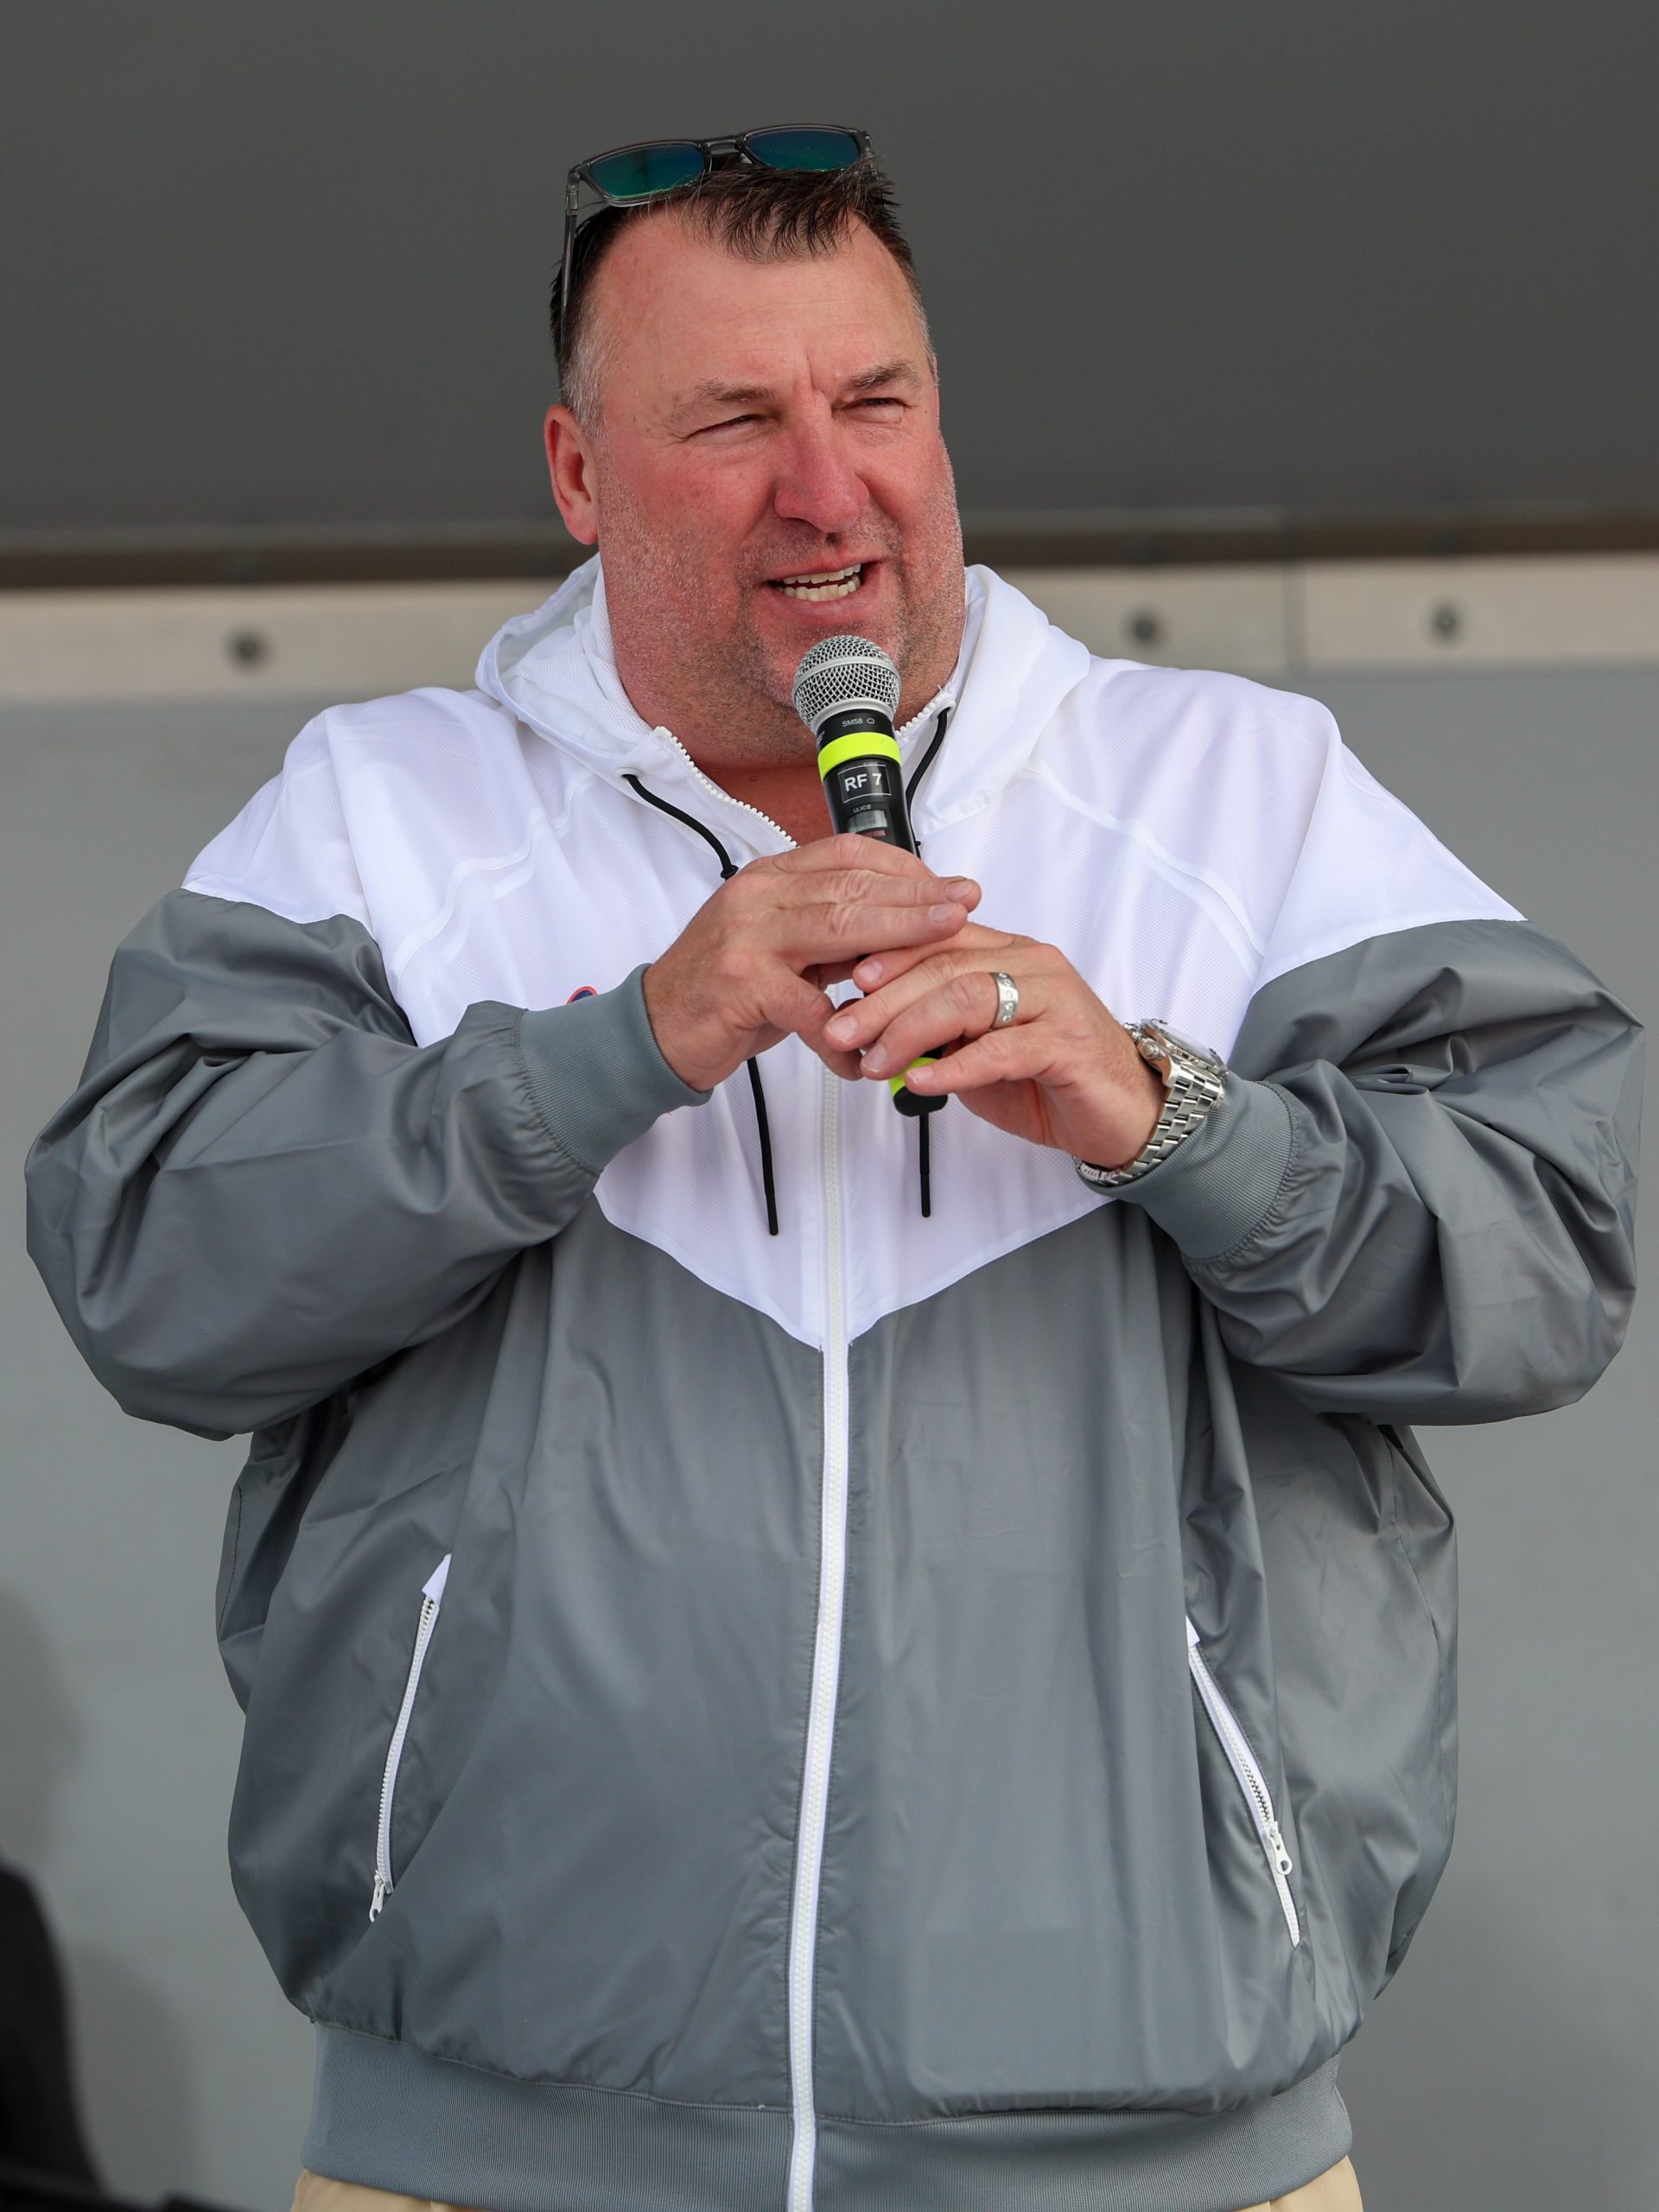 Bielema’s New Contract Includes Automatic Renewal Incentive Clause For Bowl Seasons